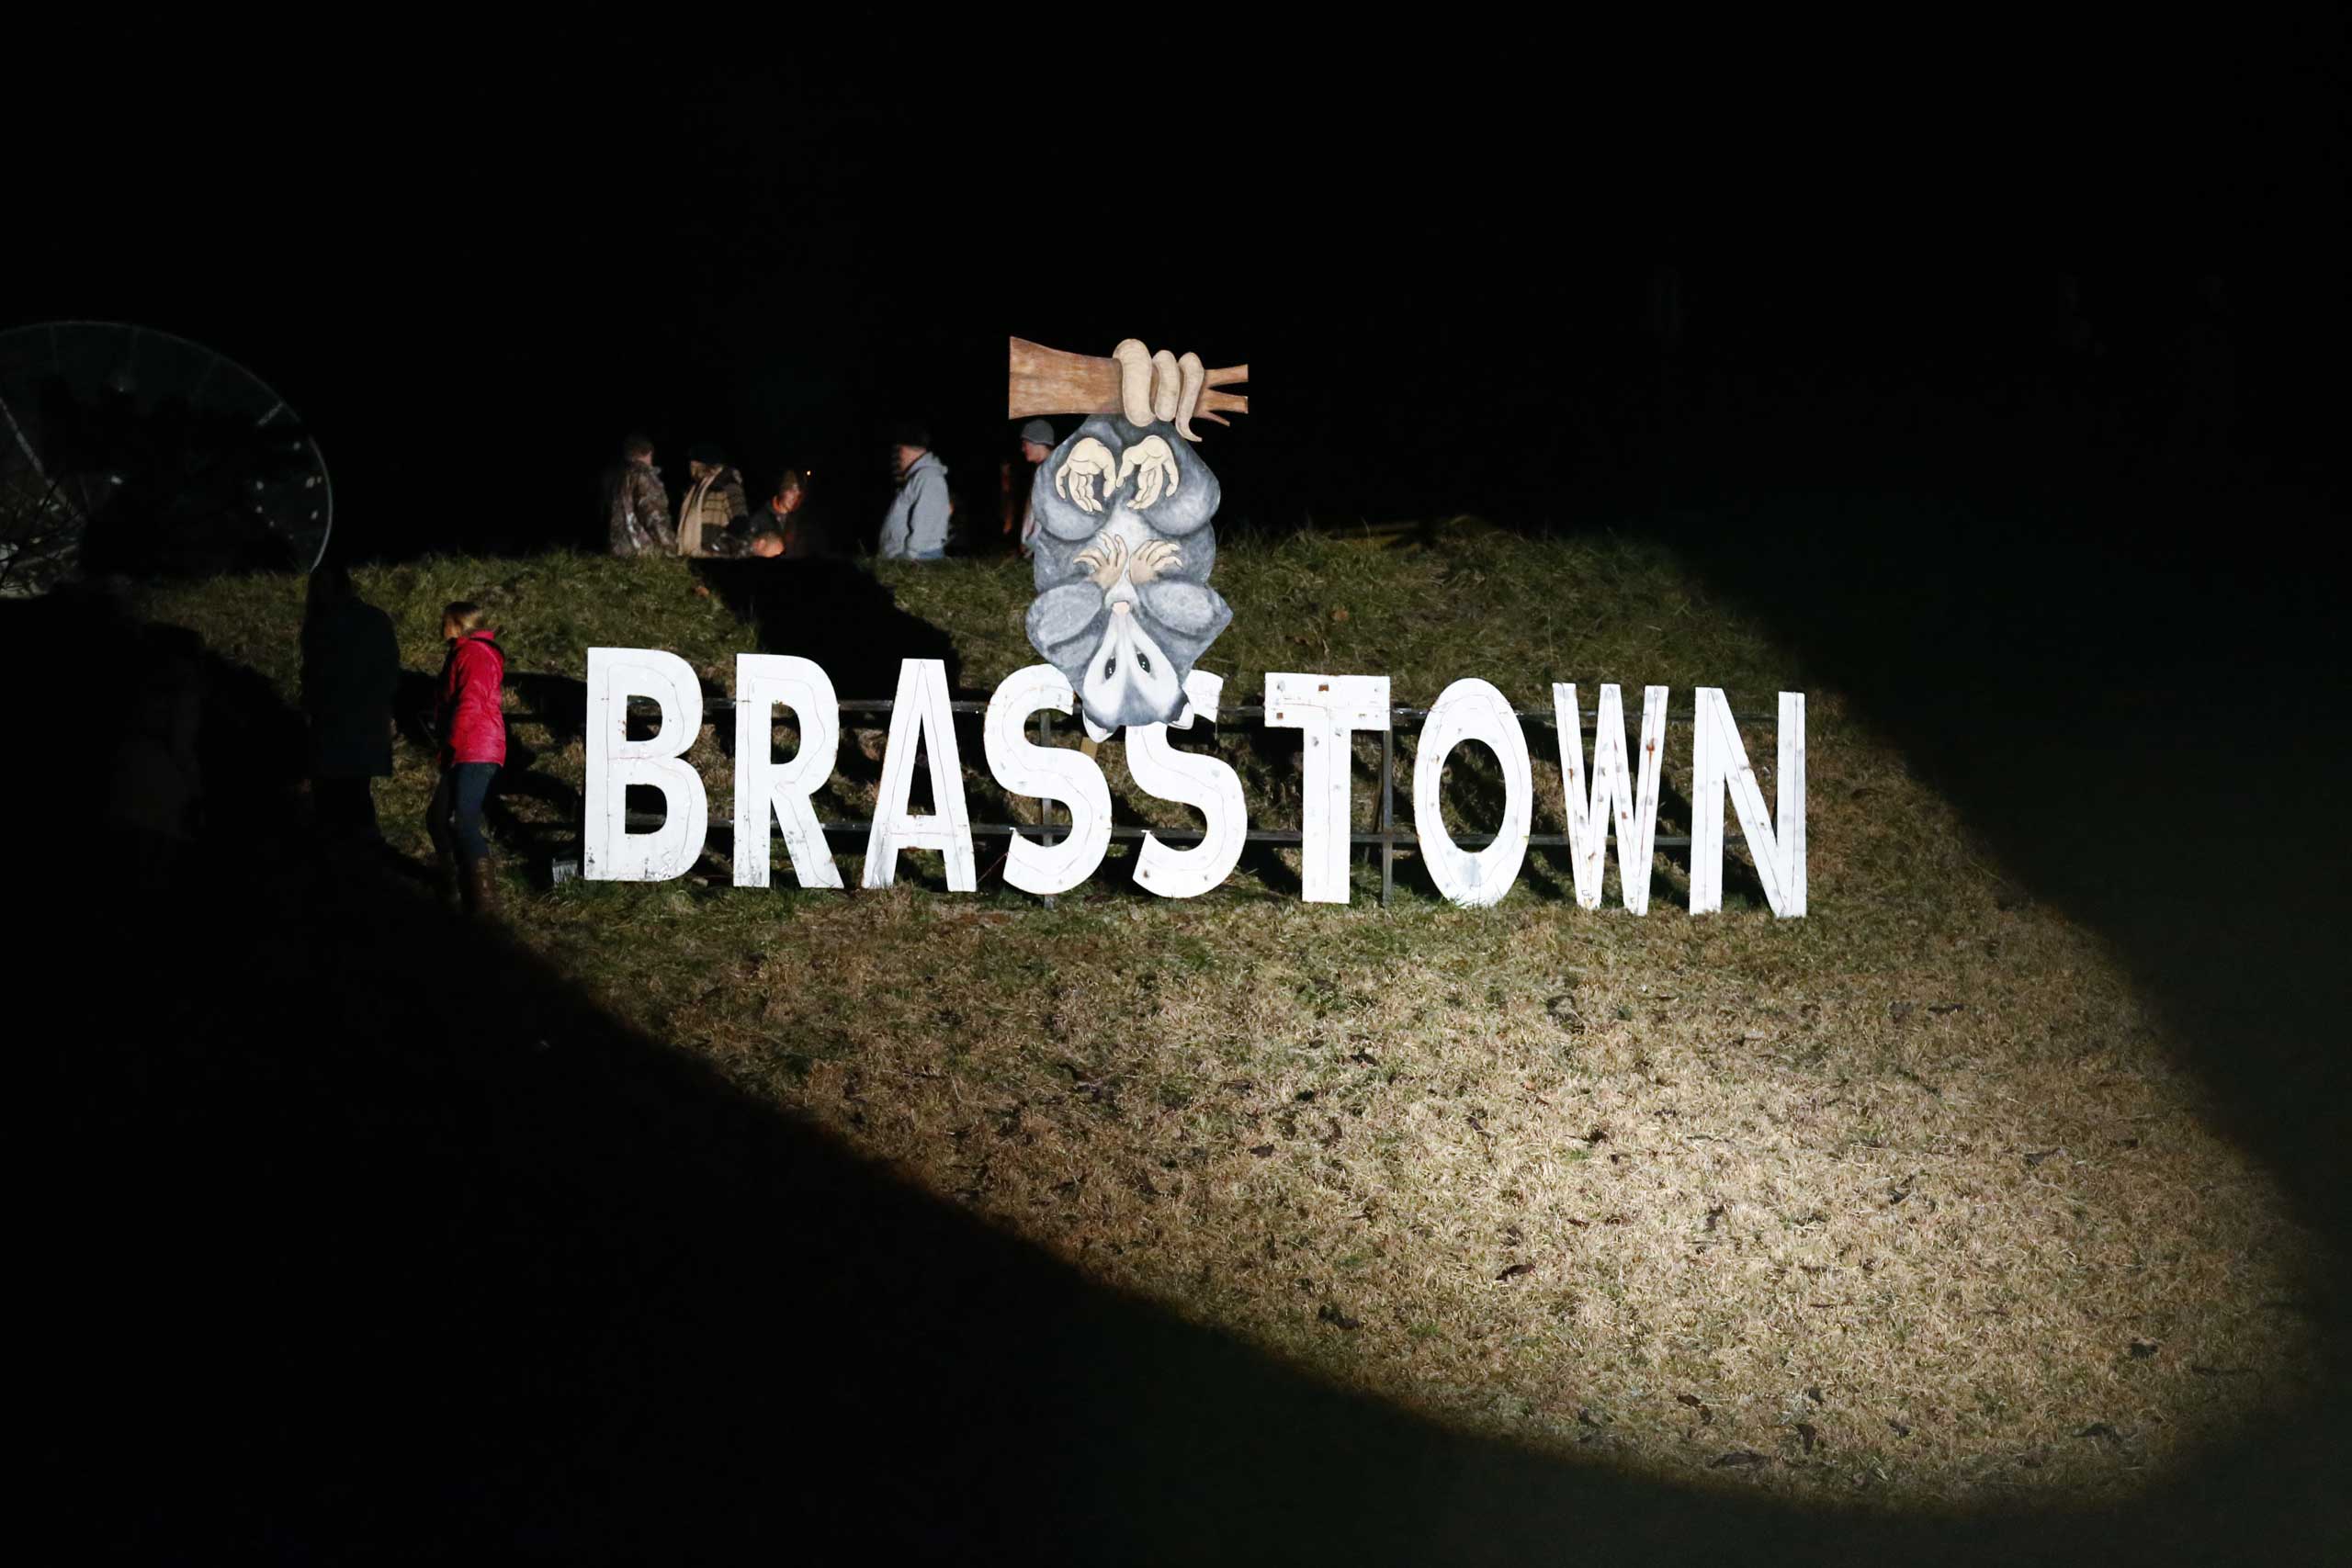 A sign honoring the possums of Brasstown is seen during the 20th annual Possum Drop on New Year's Eve at Clay's Corner in Brasstown, North Carolina, Dec. 31, 2013. (Erik S. Lesser—EPA)